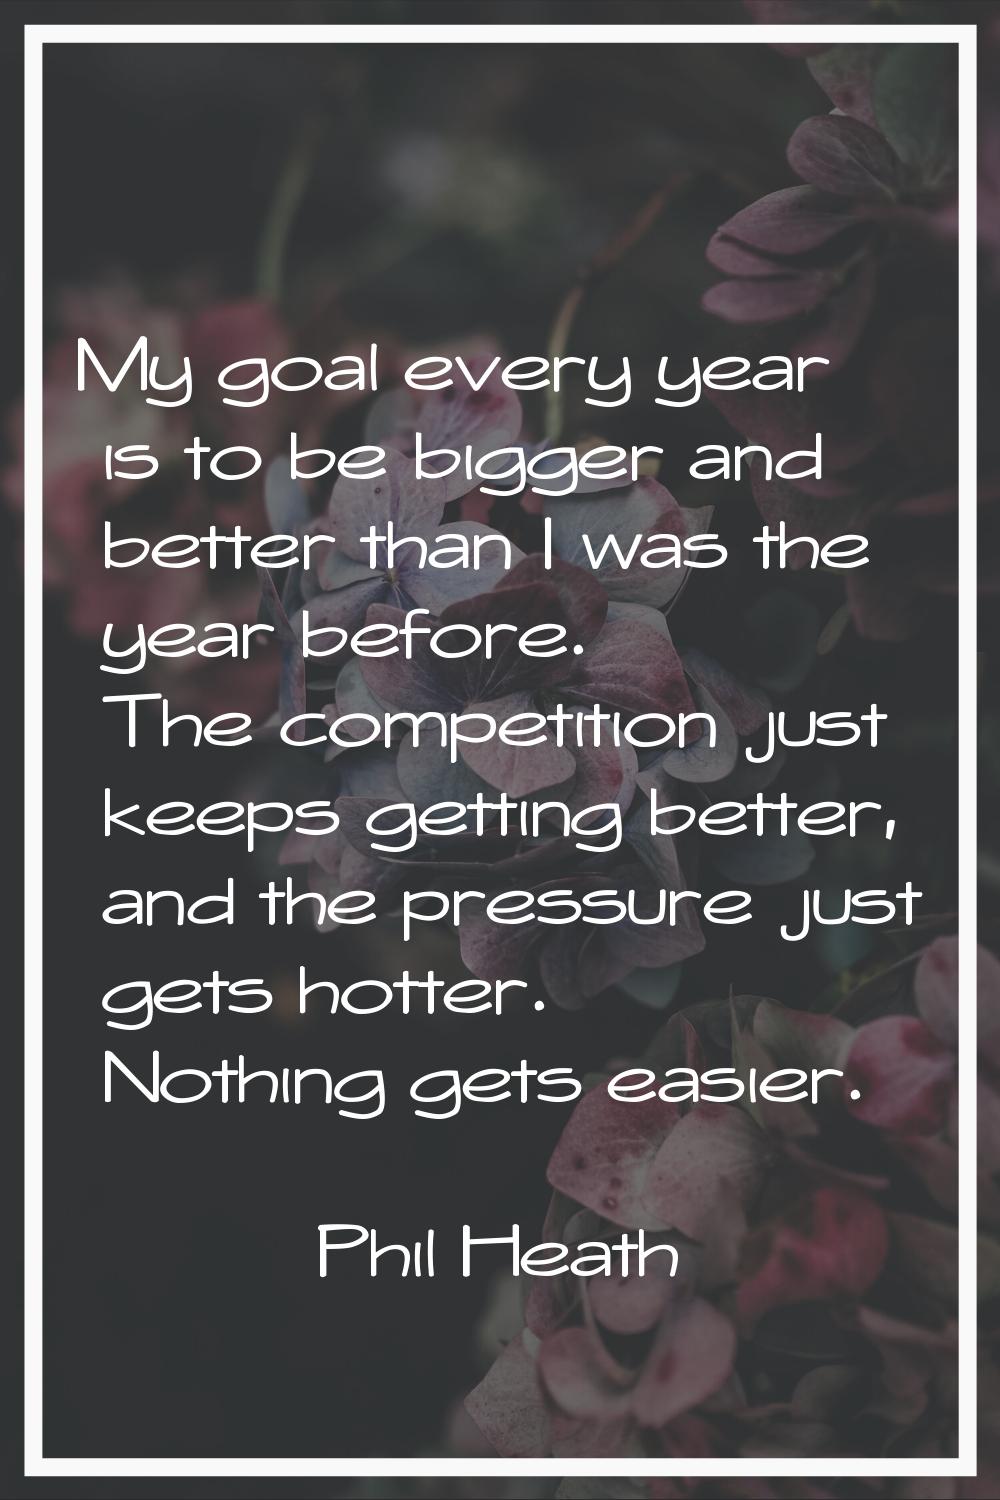 My goal every year is to be bigger and better than I was the year before. The competition just keep